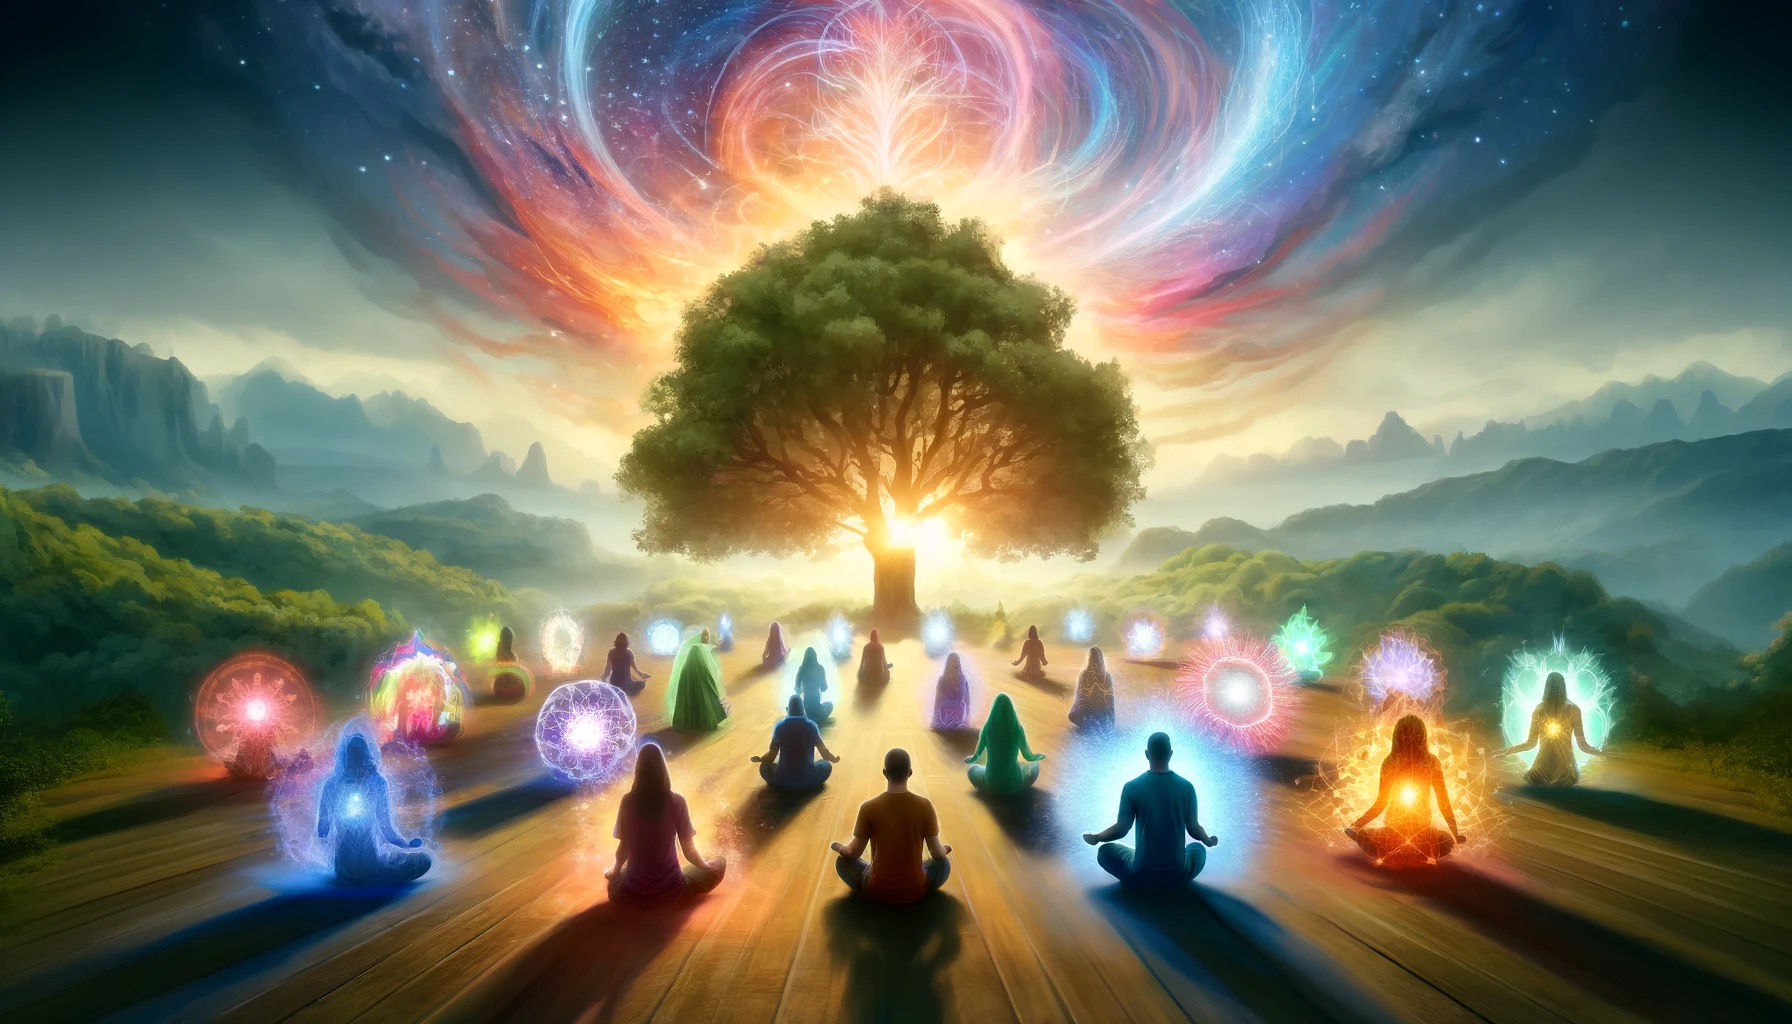 visualize the concept of a diverse spiritual awakening within a recovery community. The image should feature a serene, natural setting with a large tr